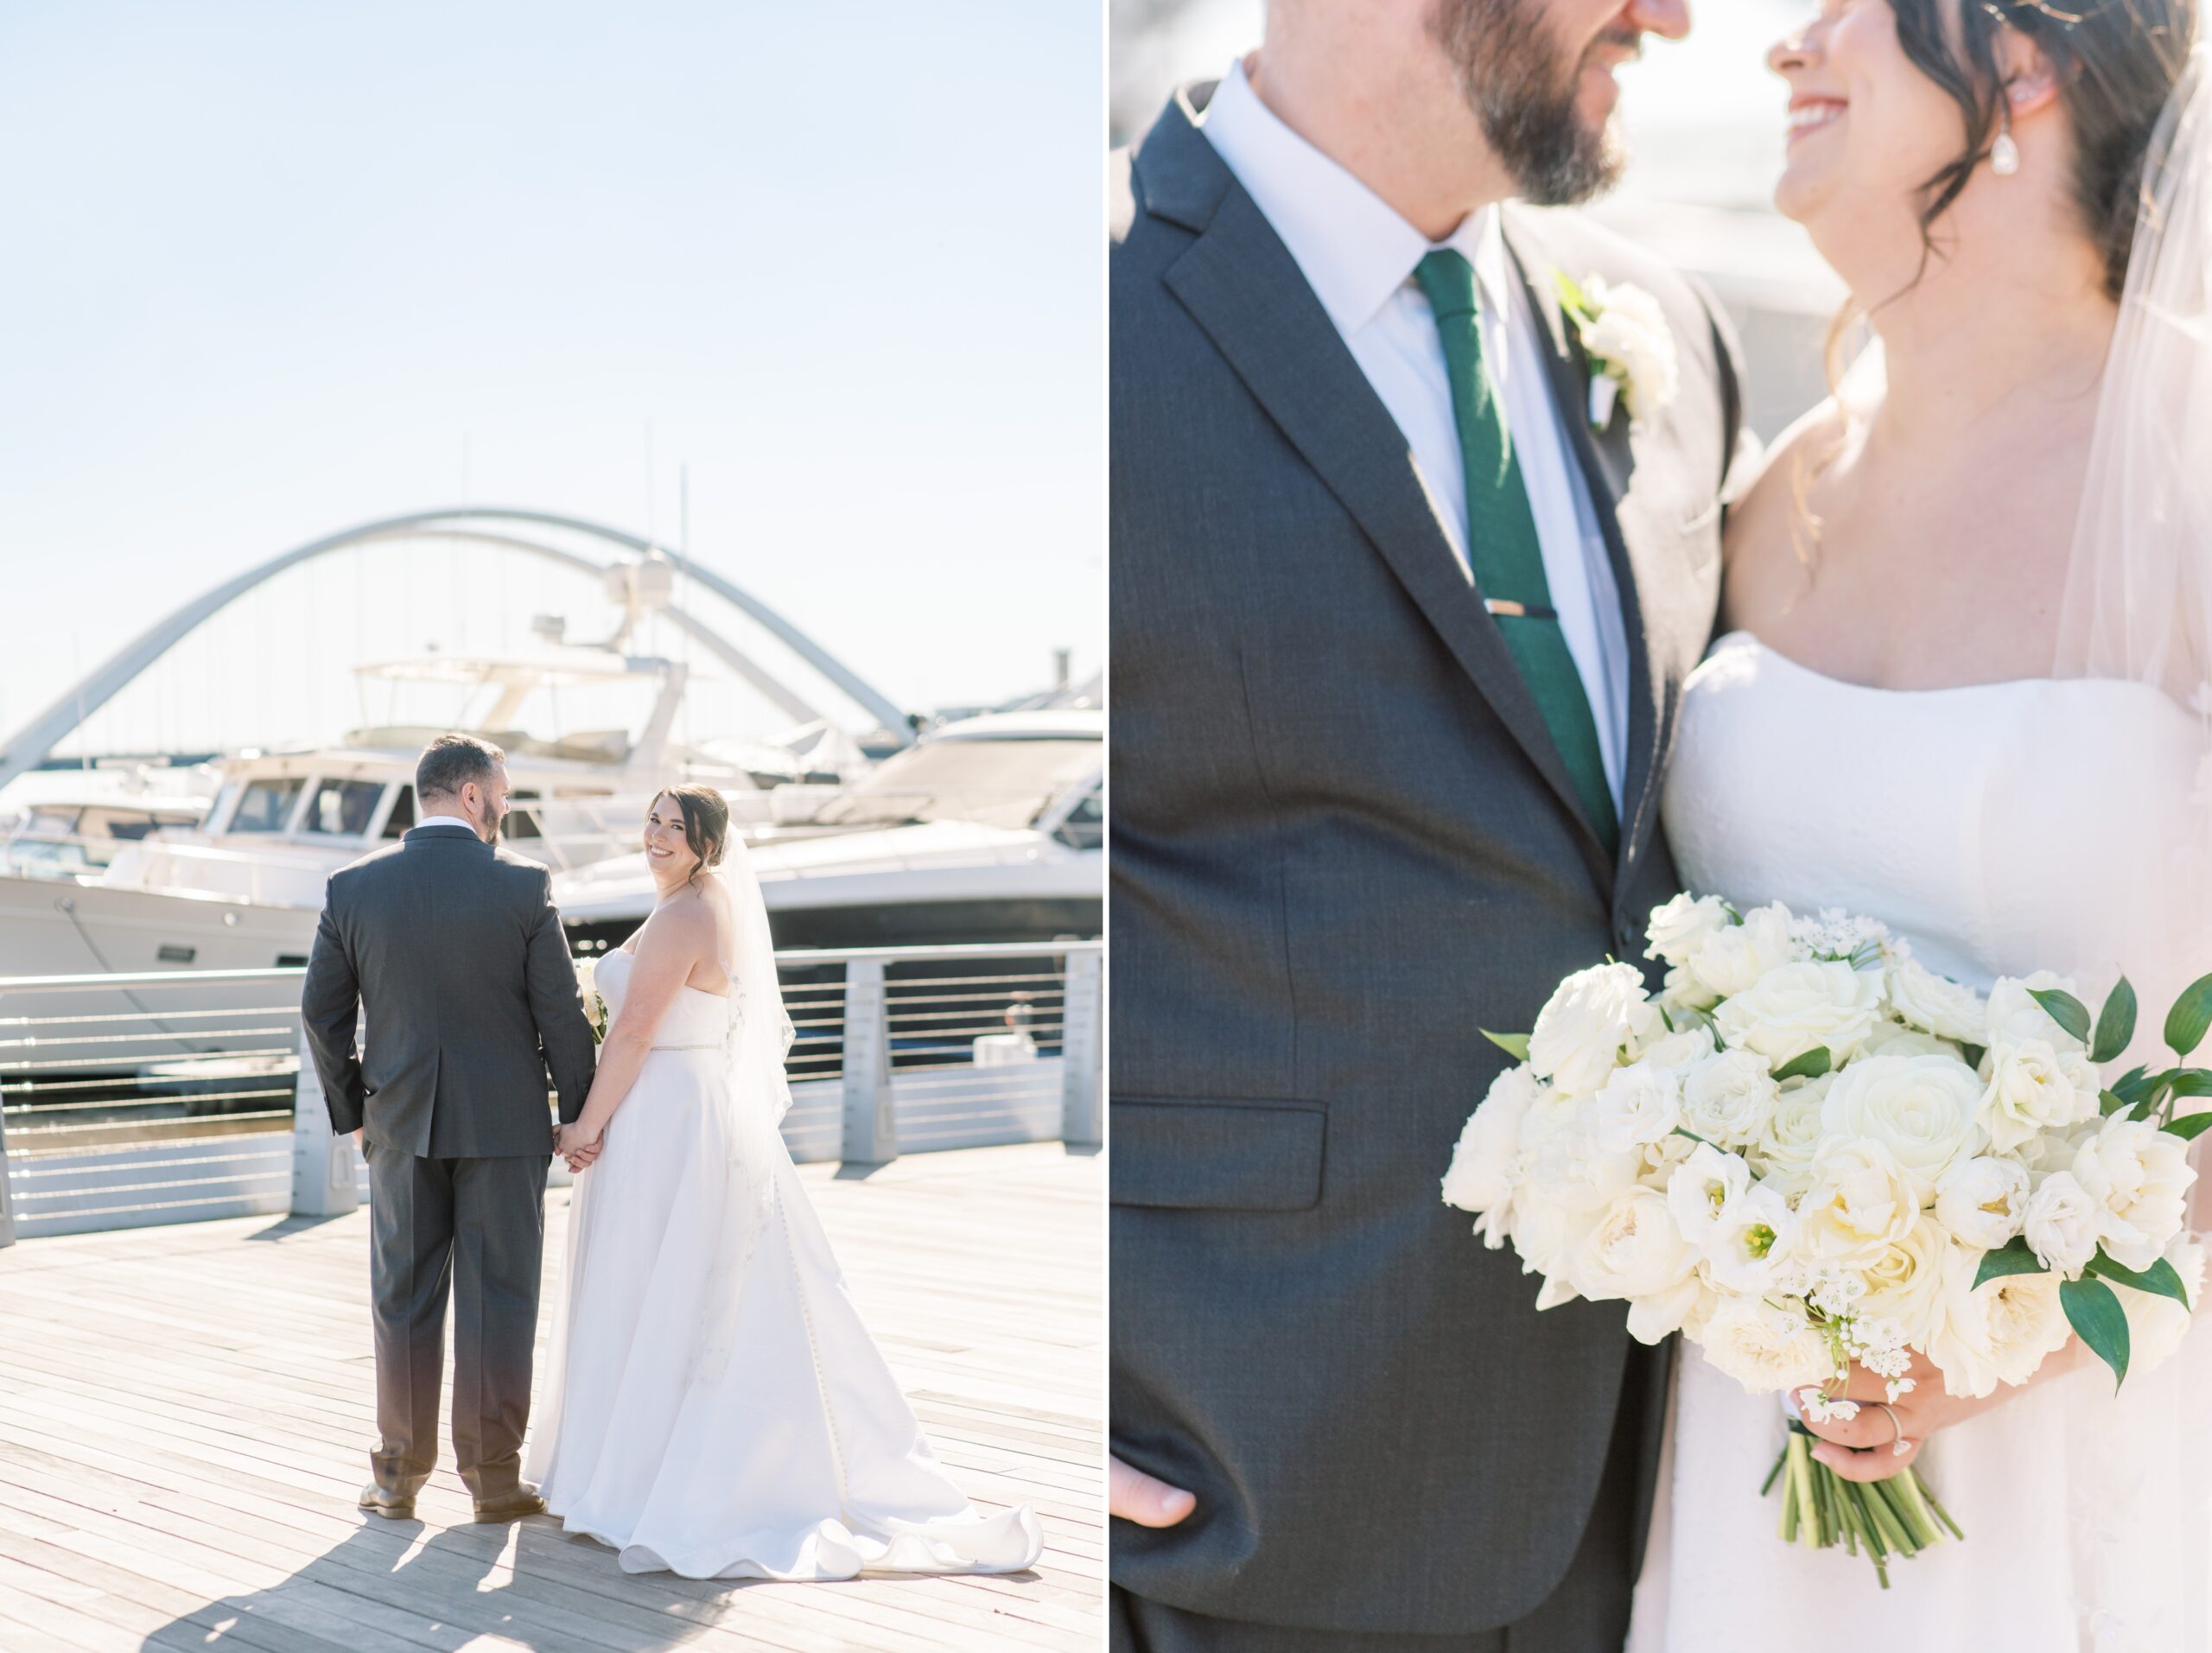 A spring District Winery wedding in Washington, DC.